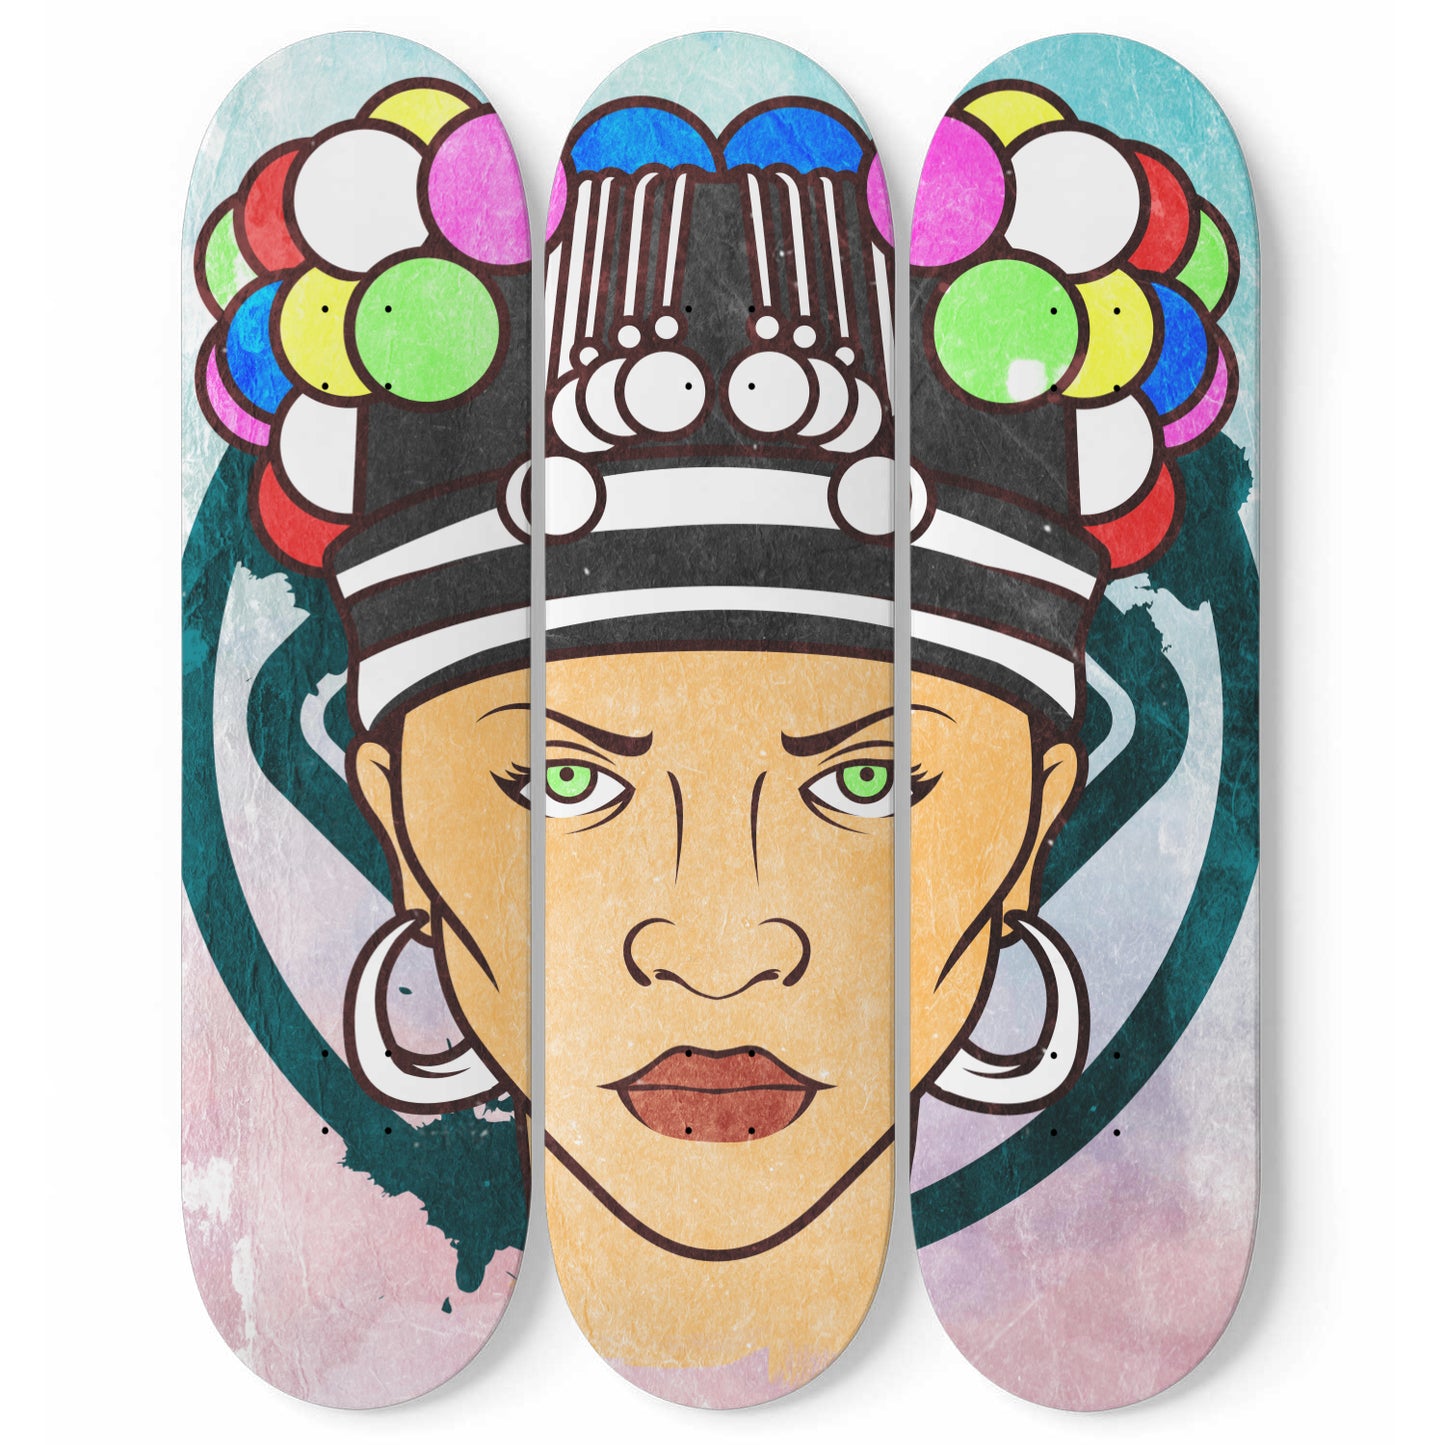 Hmong girl with Colourful Traditional Hat - 3 Piece Skateboard Wall Art